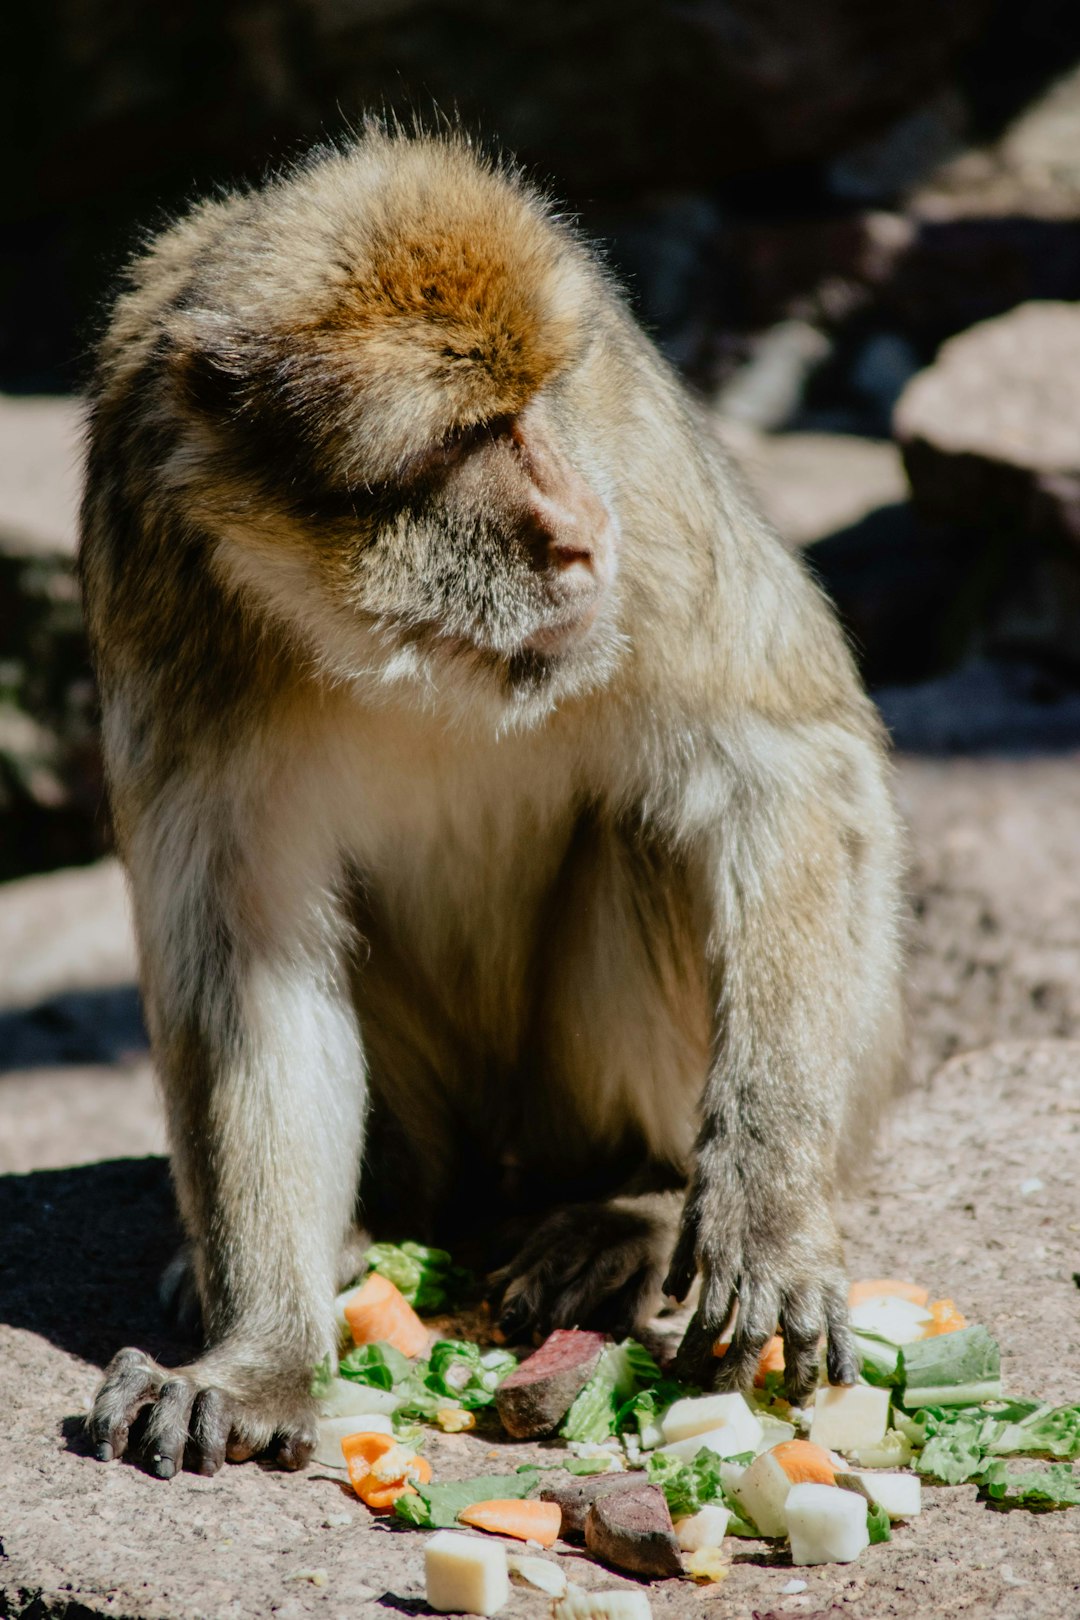 brown monkey sitting on brown wooden surface during daytime